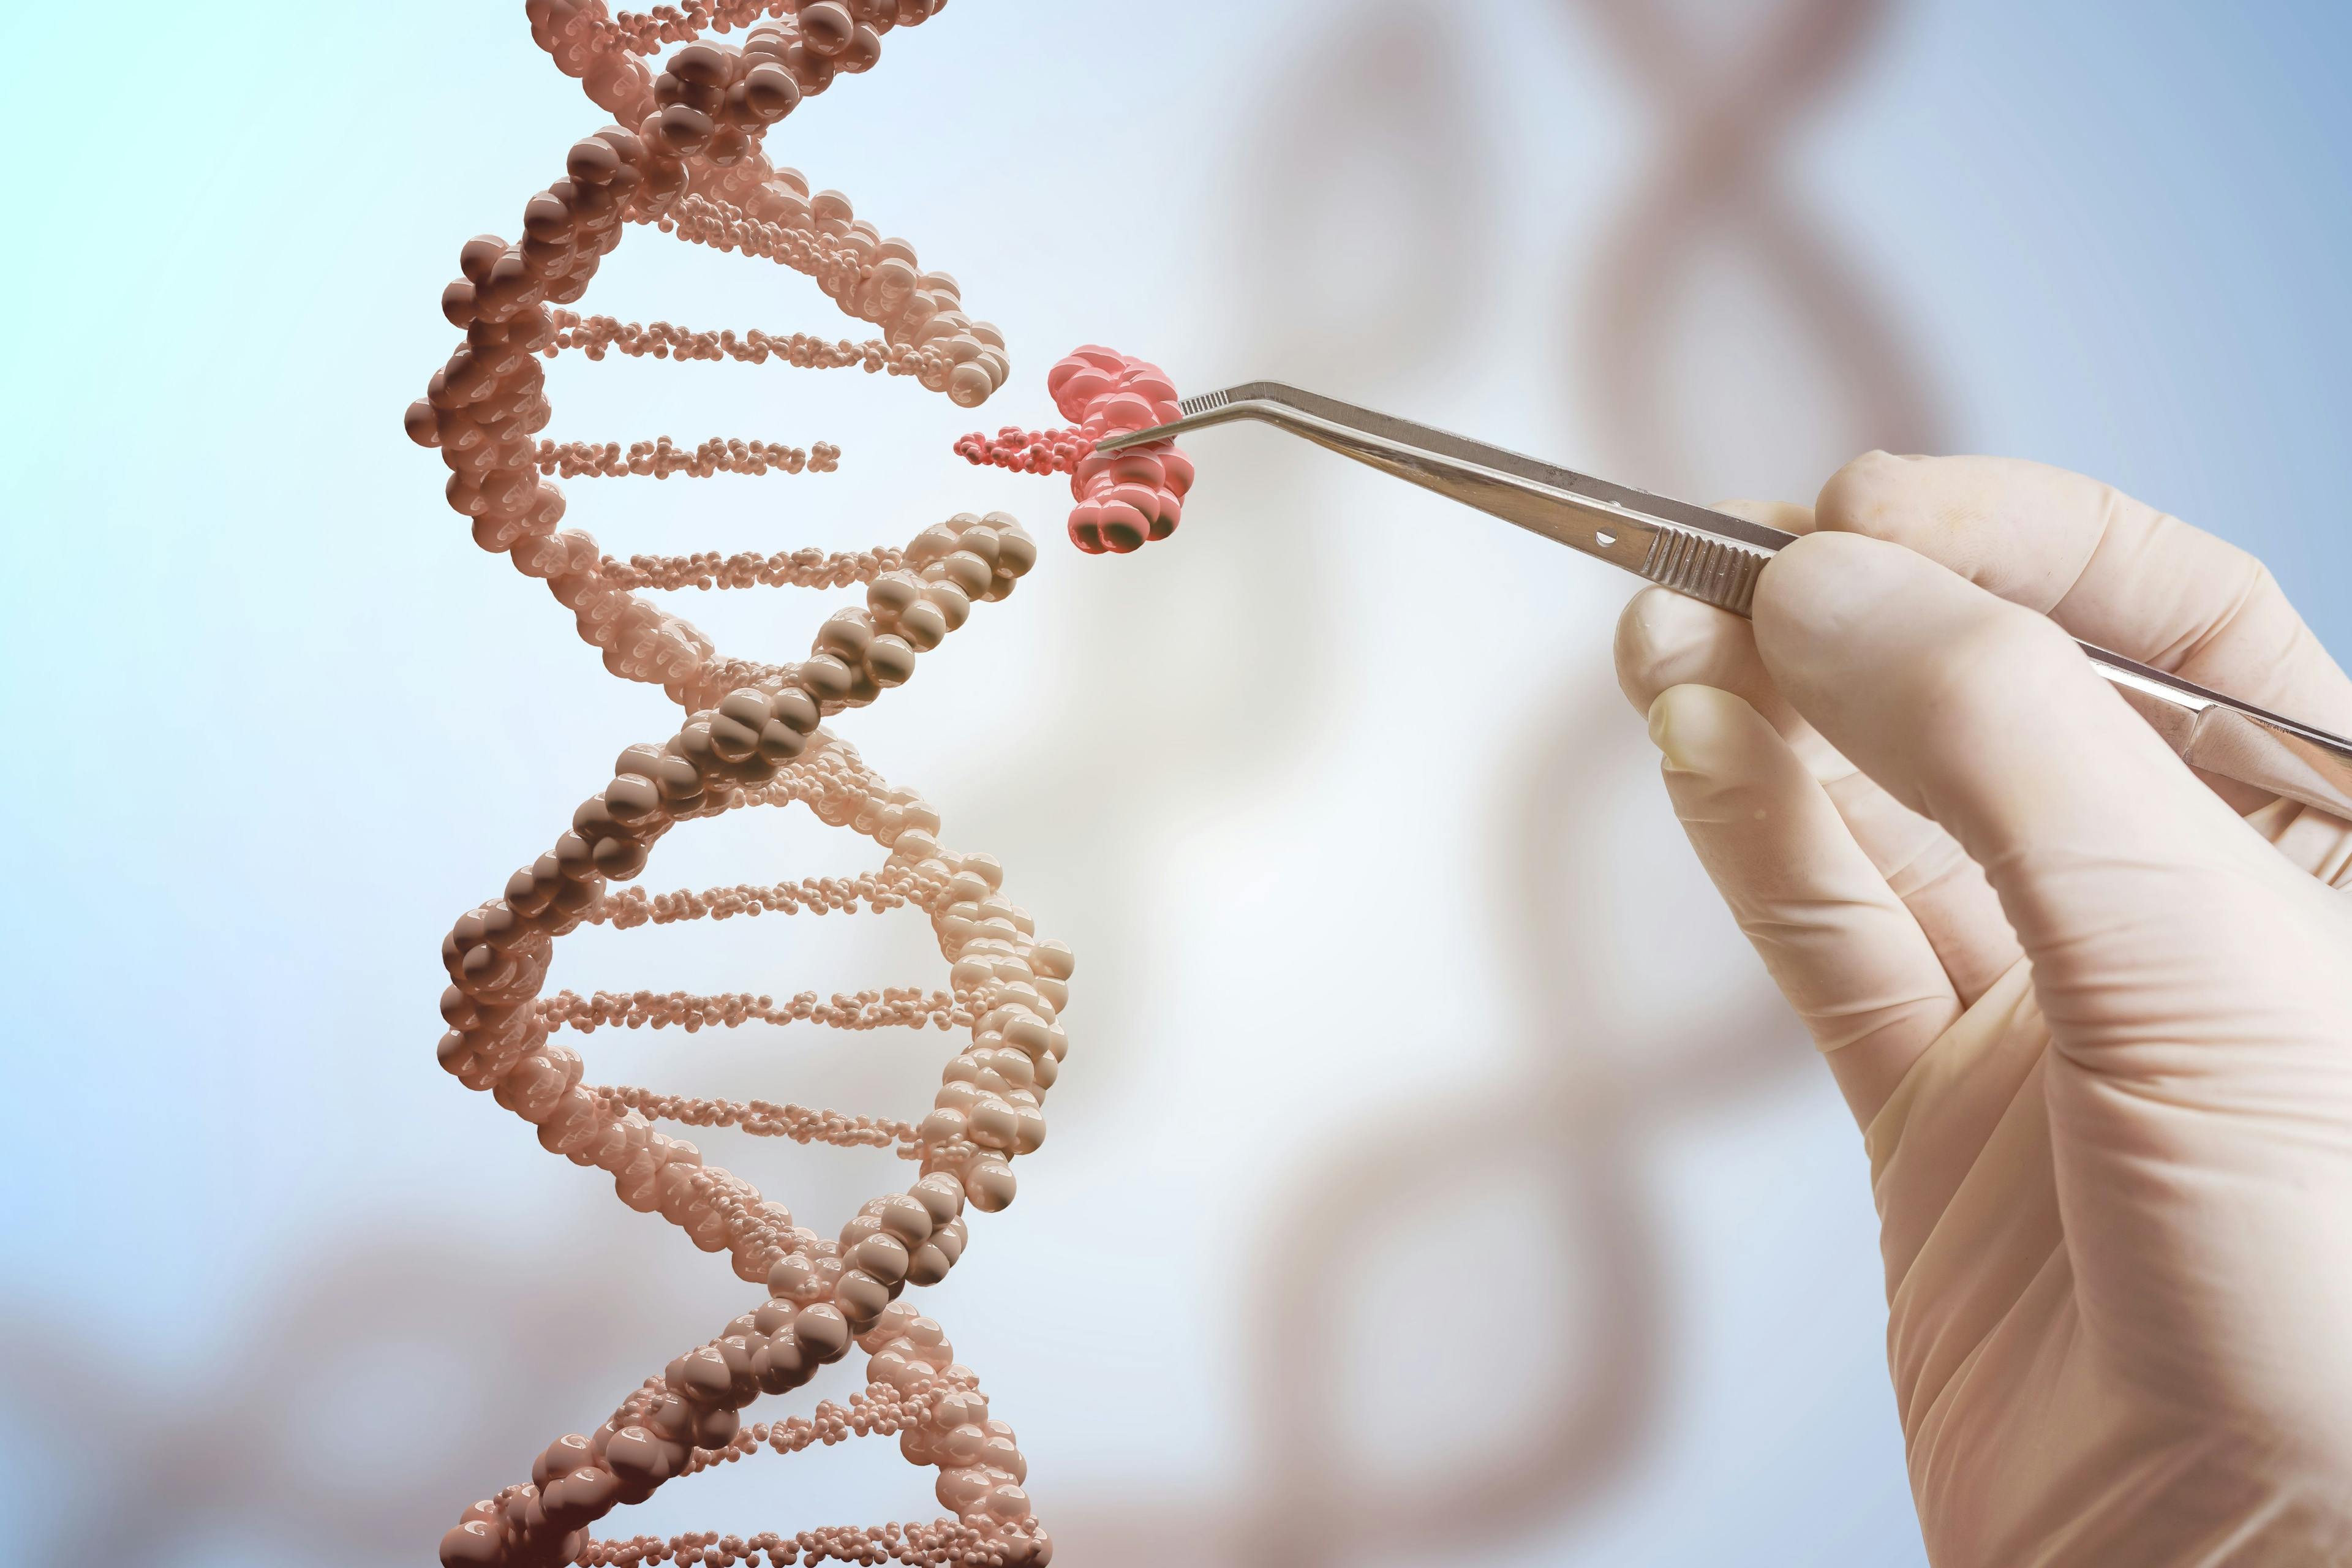 Assessing Medicaid Policy Barriers to Gene, Cell Therapies